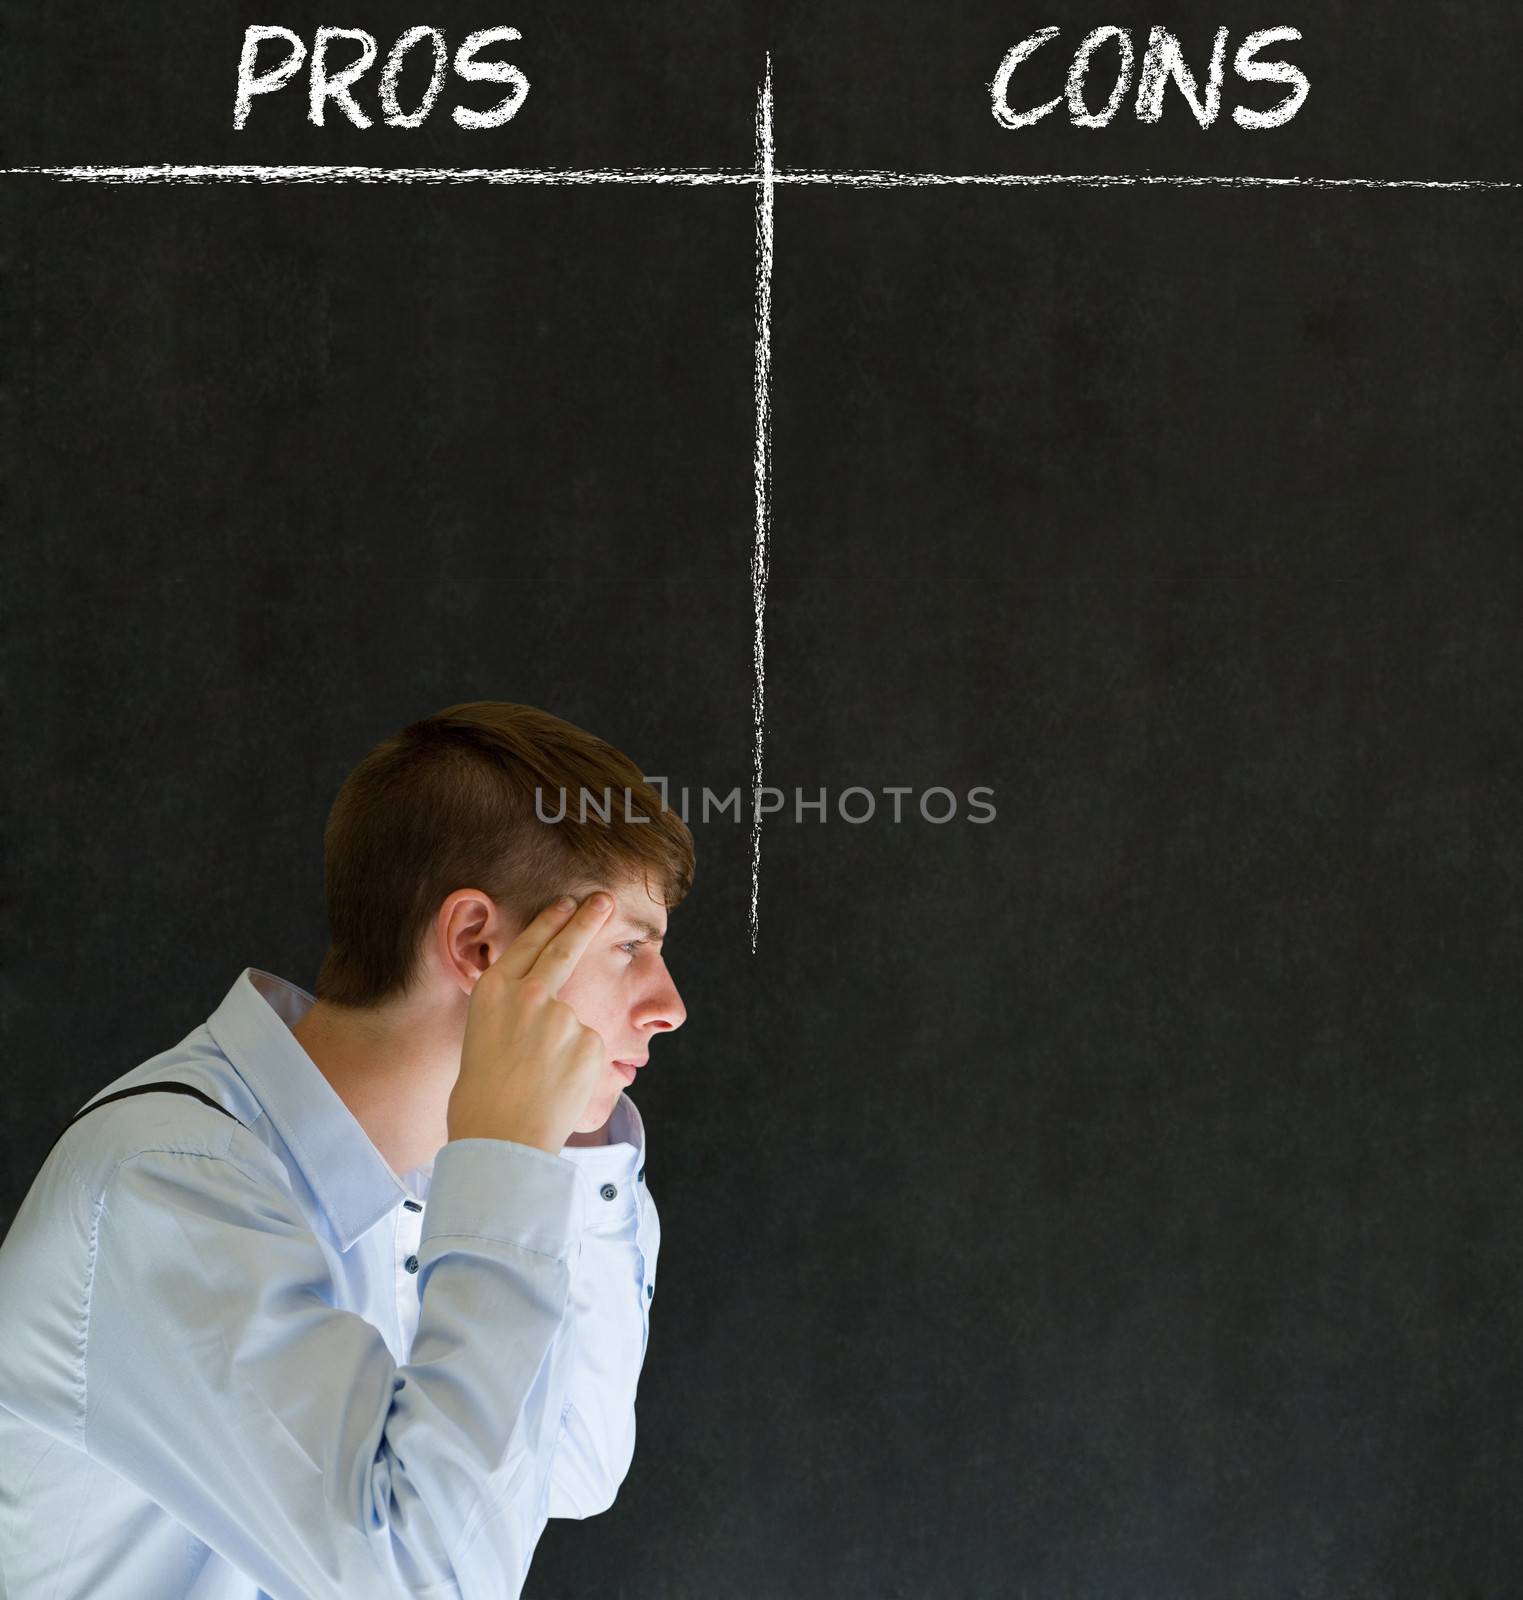 Businessman, student or teacher thinking pros and cons decision list chalk concept blackboard background